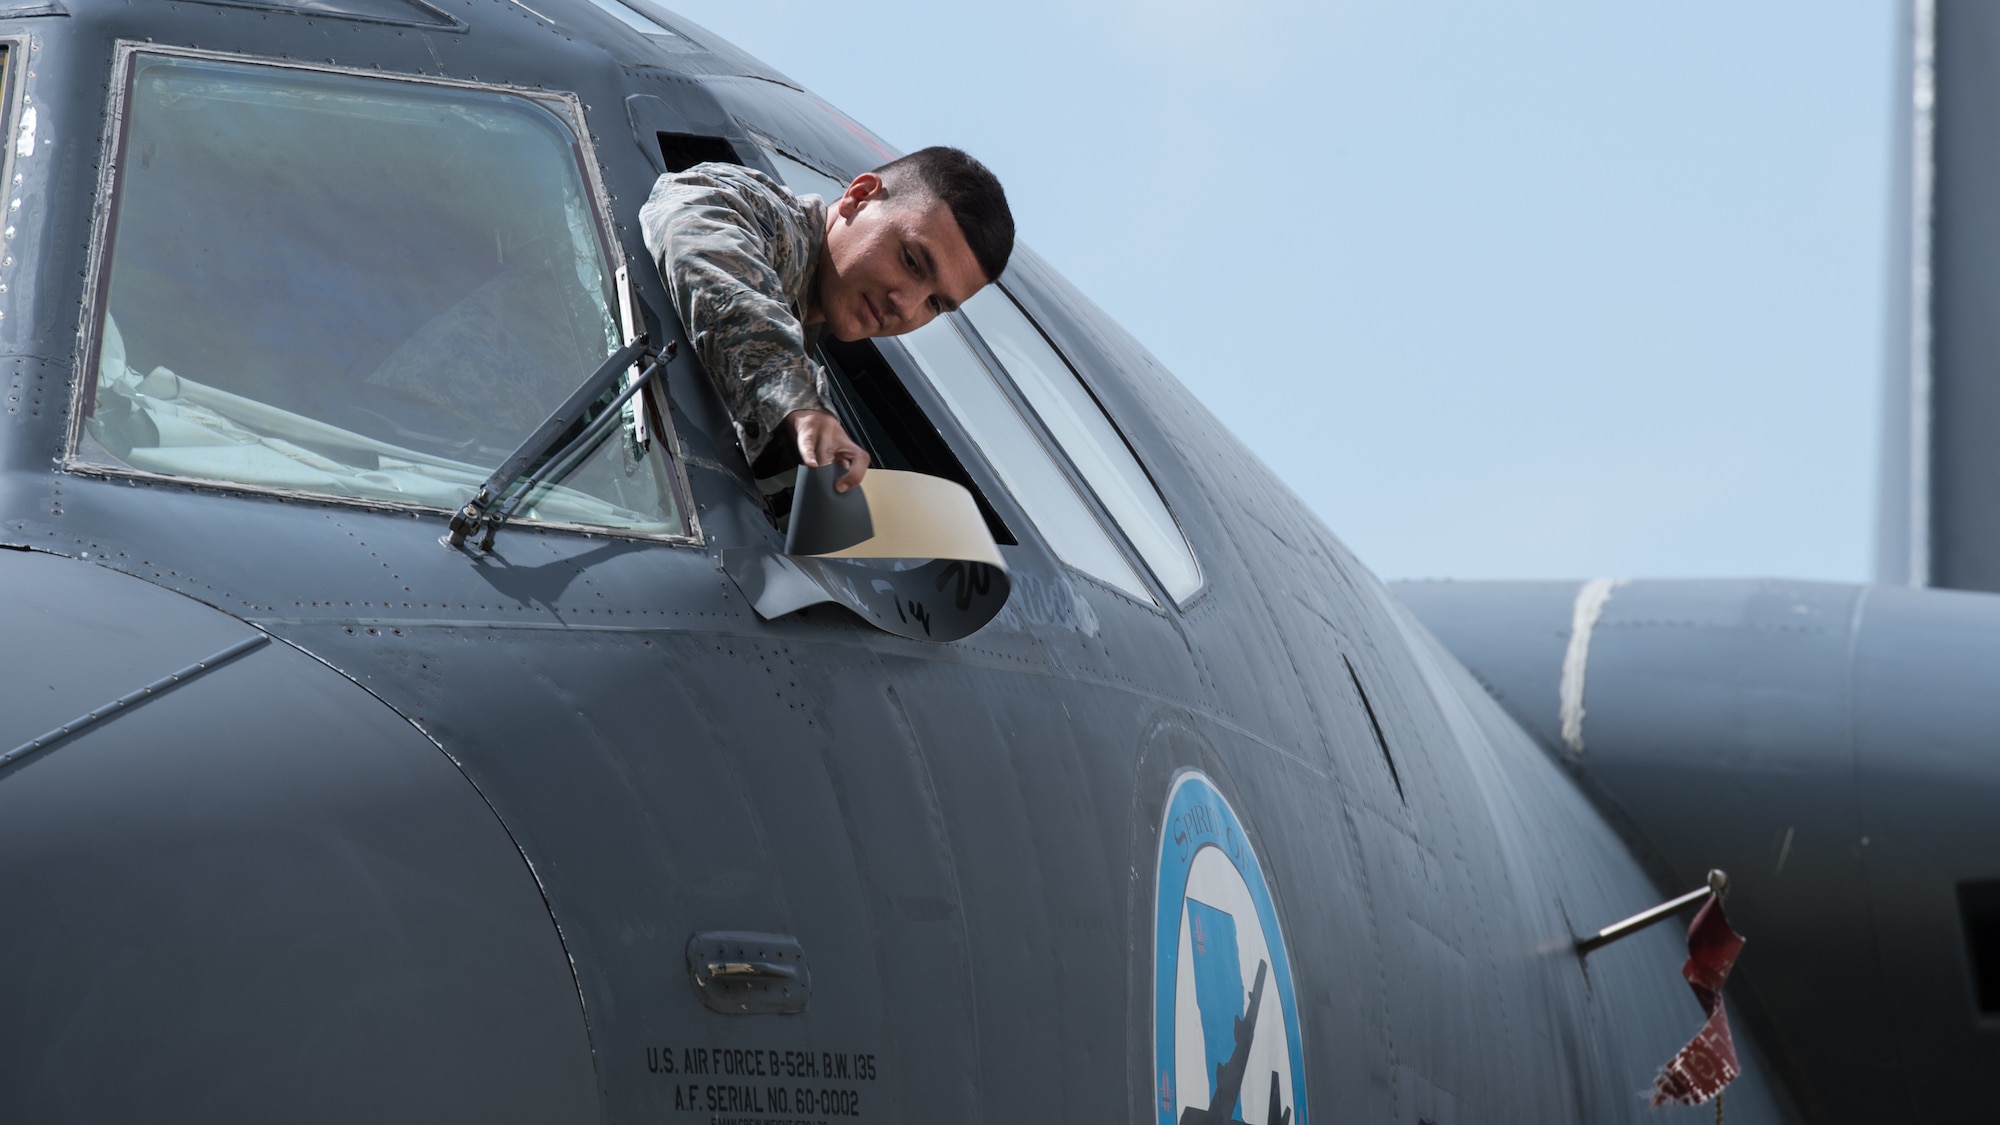 An Airman reveals the new commander’s name on a B-52 Stratofortress during the 2nd Bomb Wing change of command ceremony at Barksdale Air Force Base, La. June 18, 2018. Traditionally, commanders have their names painted onto the wing’s flagship. (U.S. Air Force photo by Airman 1st Class Lillian Combes)